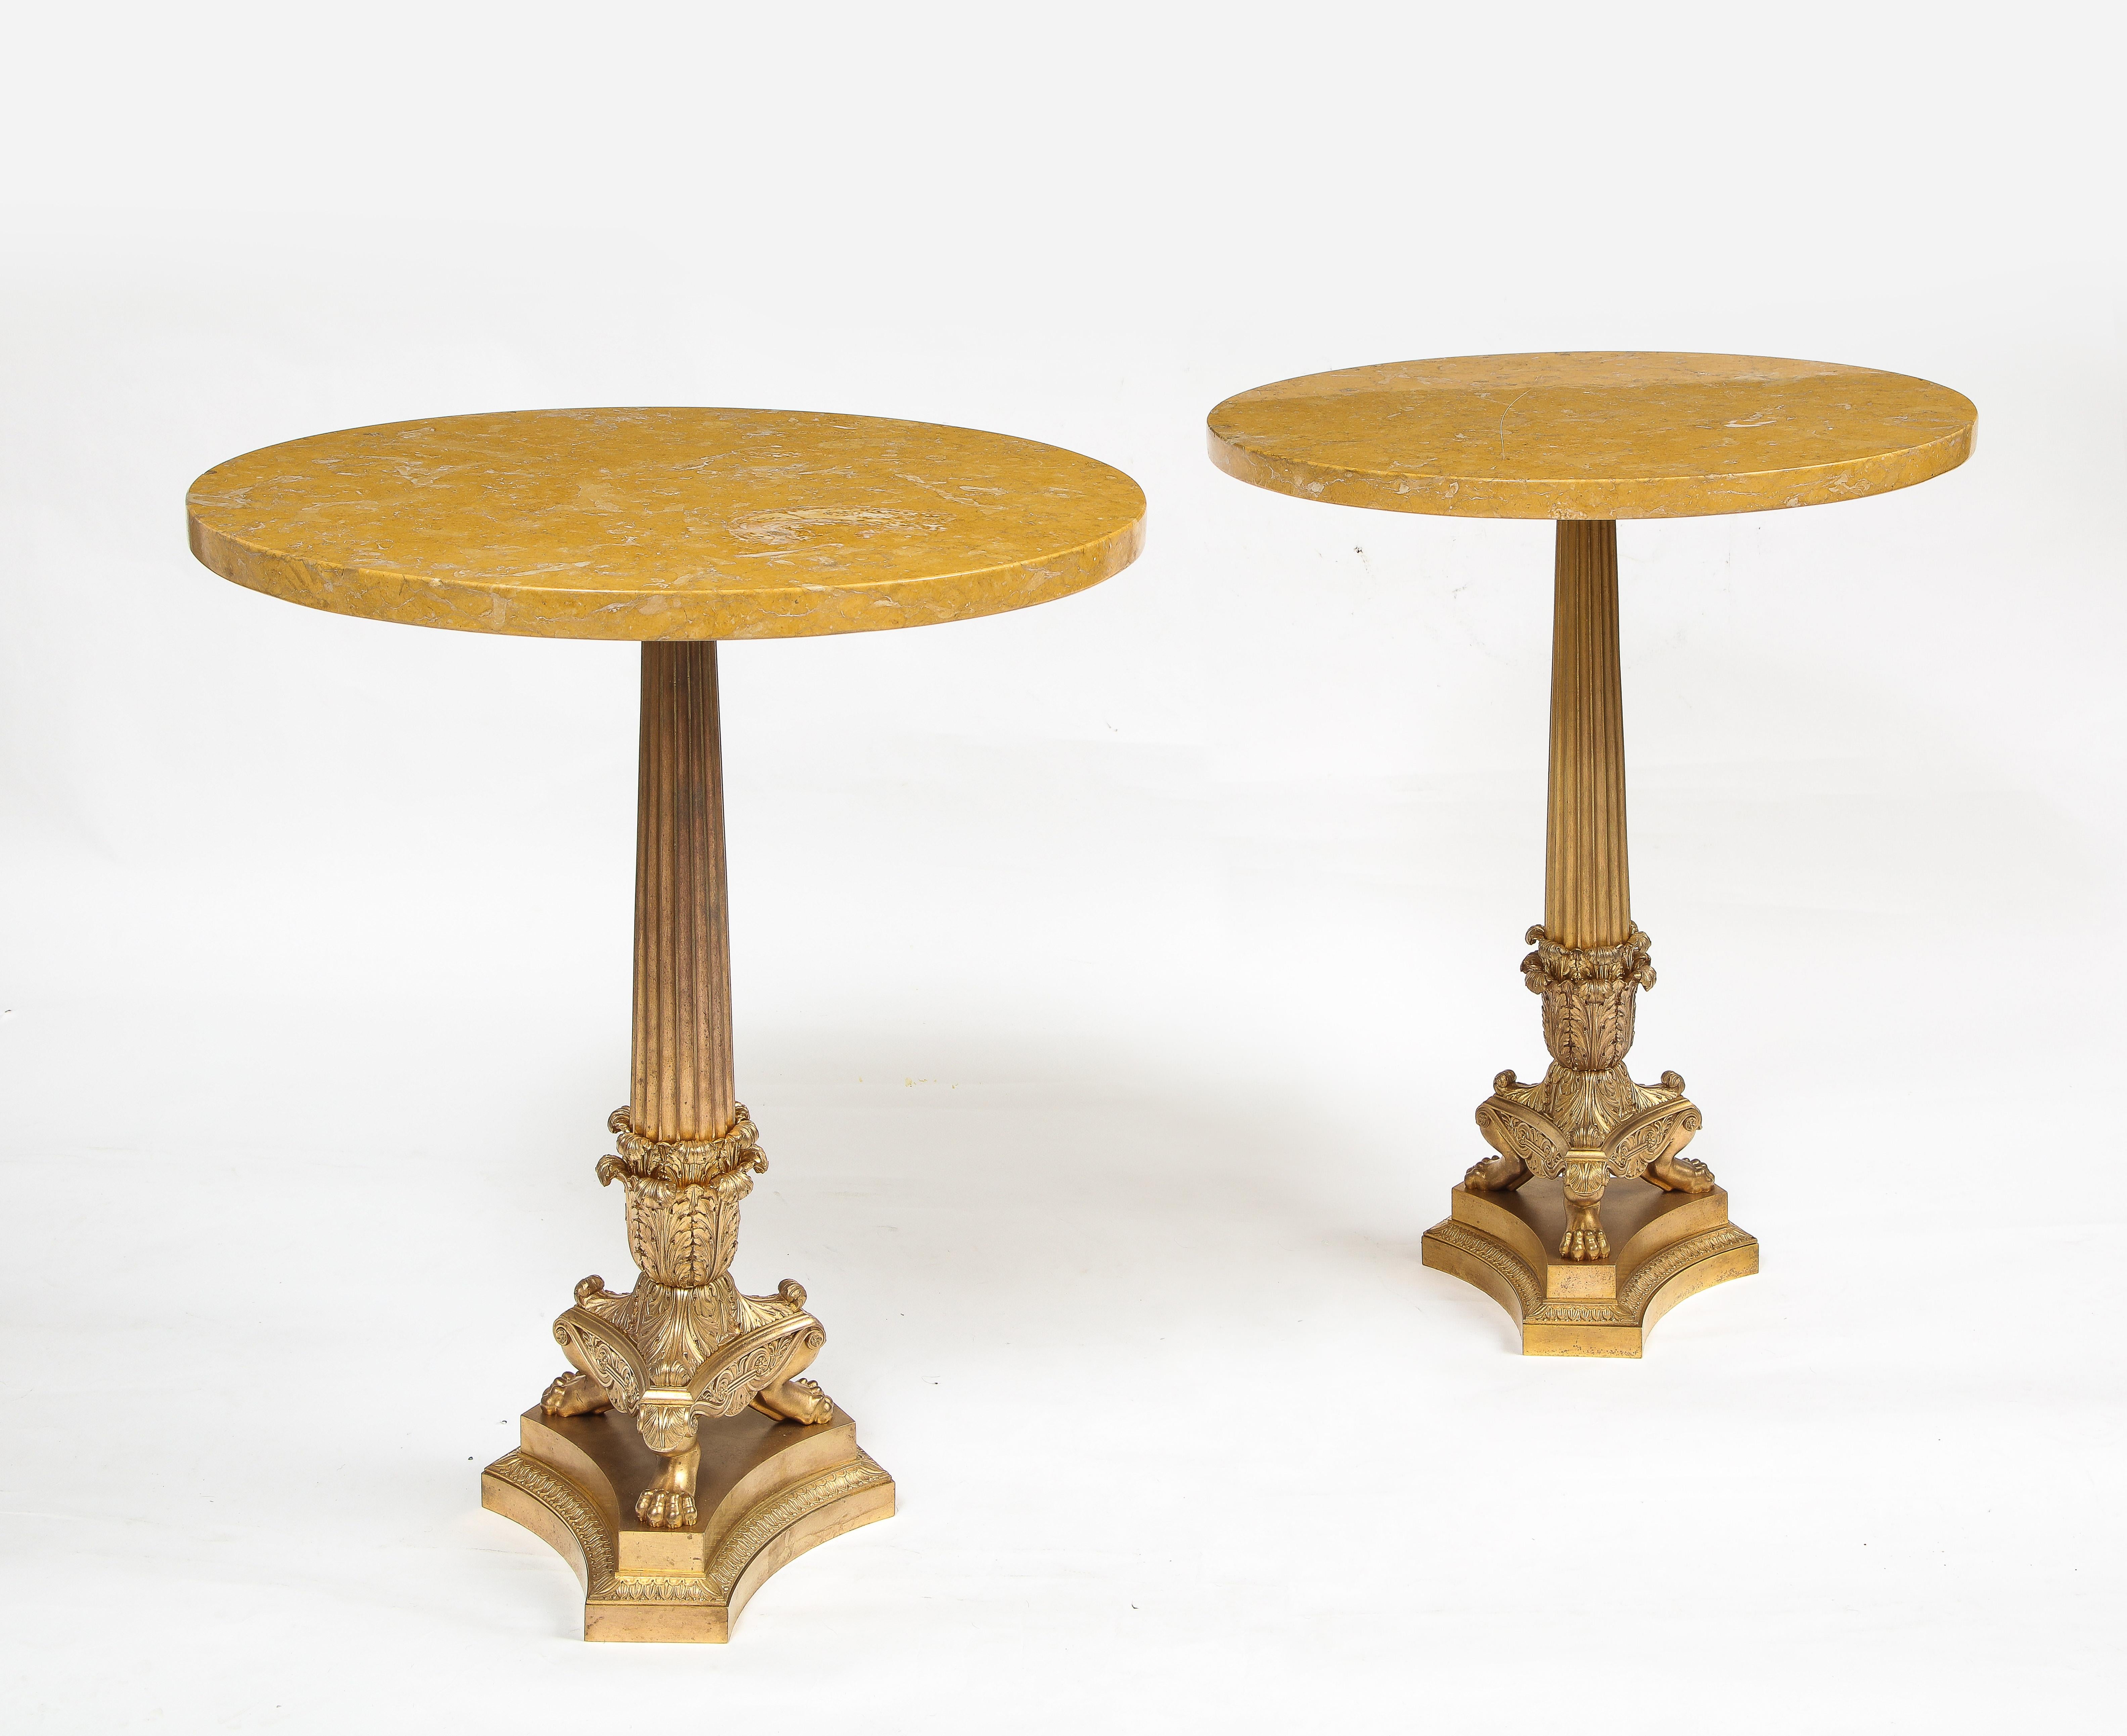 A Pair of 19th Century Empire Style Dore Bronze and Siena Marble Top Gueridons. The dore bronze bases are beautifully cast, hand-chased and hand-chiseled. The bottom of each table is supported on a triangular base with acanthus leaf borders and